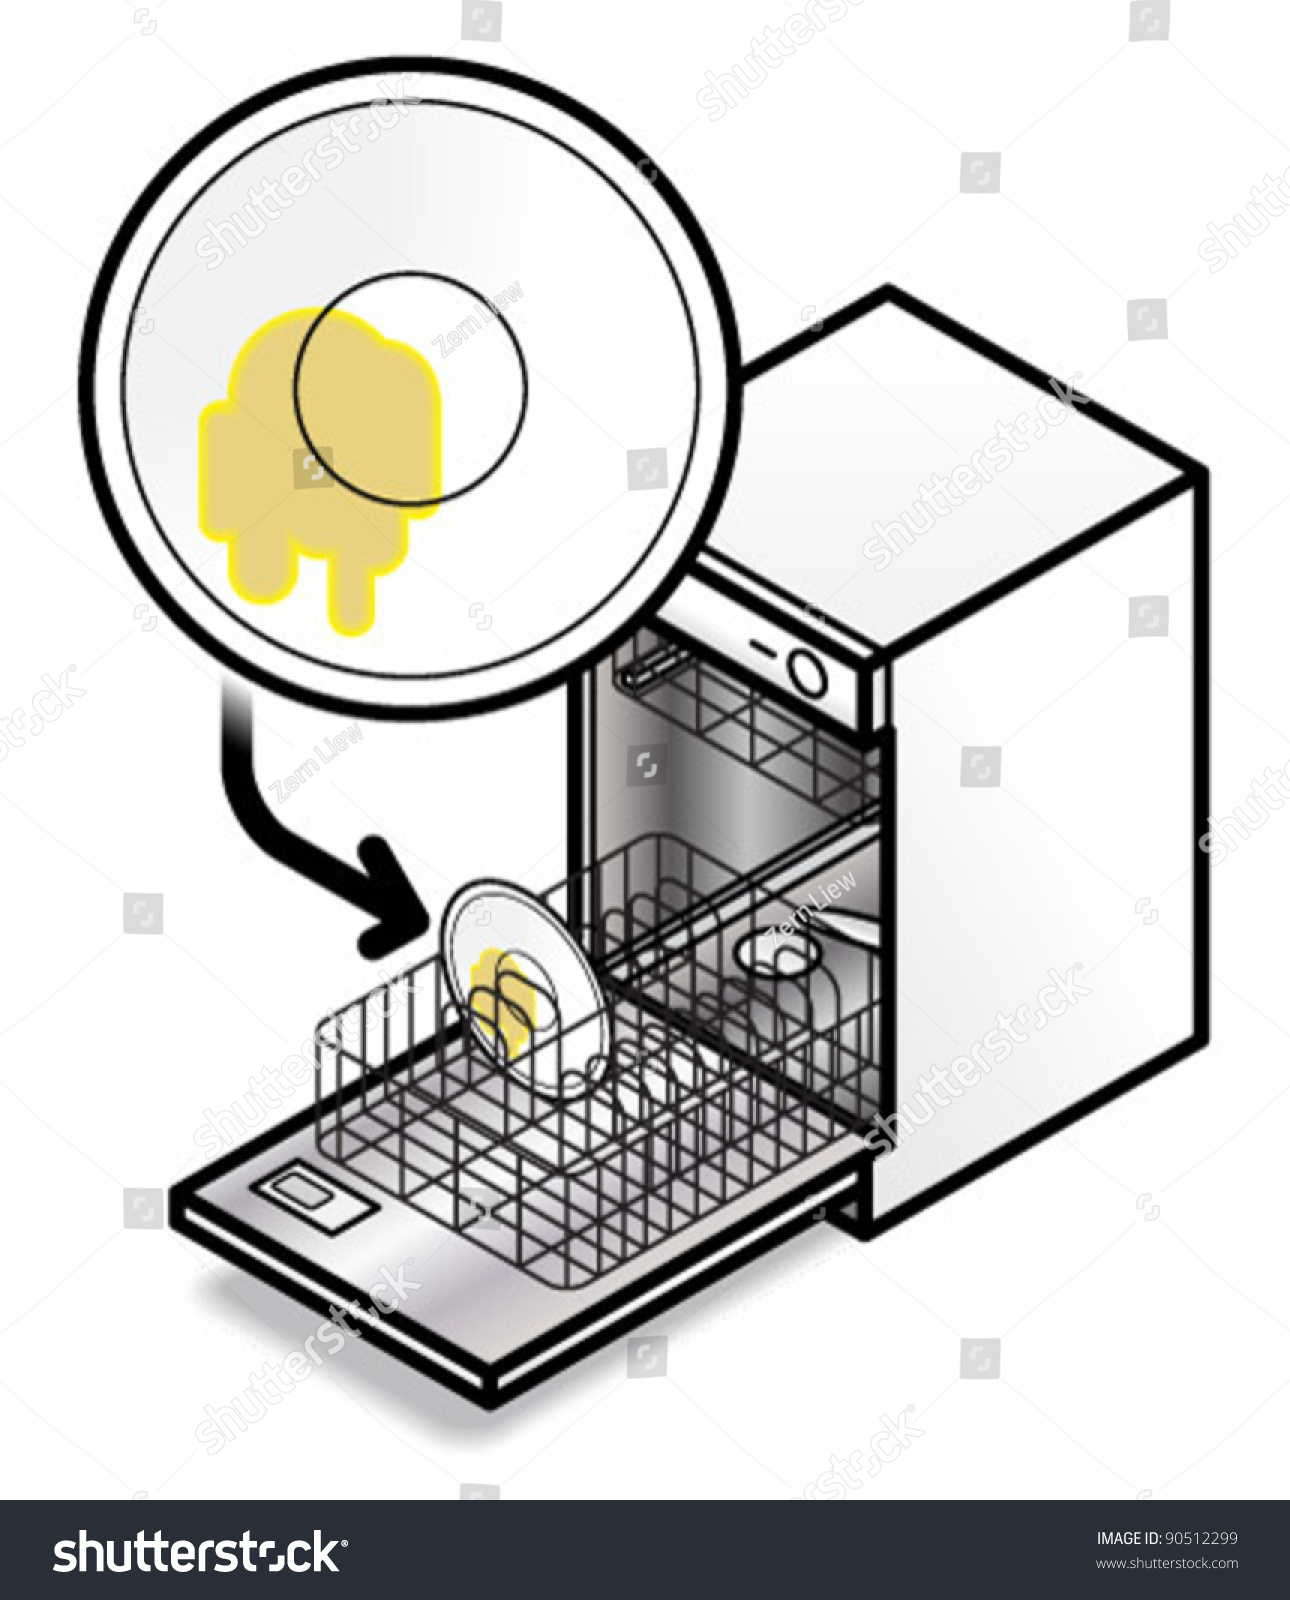 free clipart images dirty dishes - photo #20